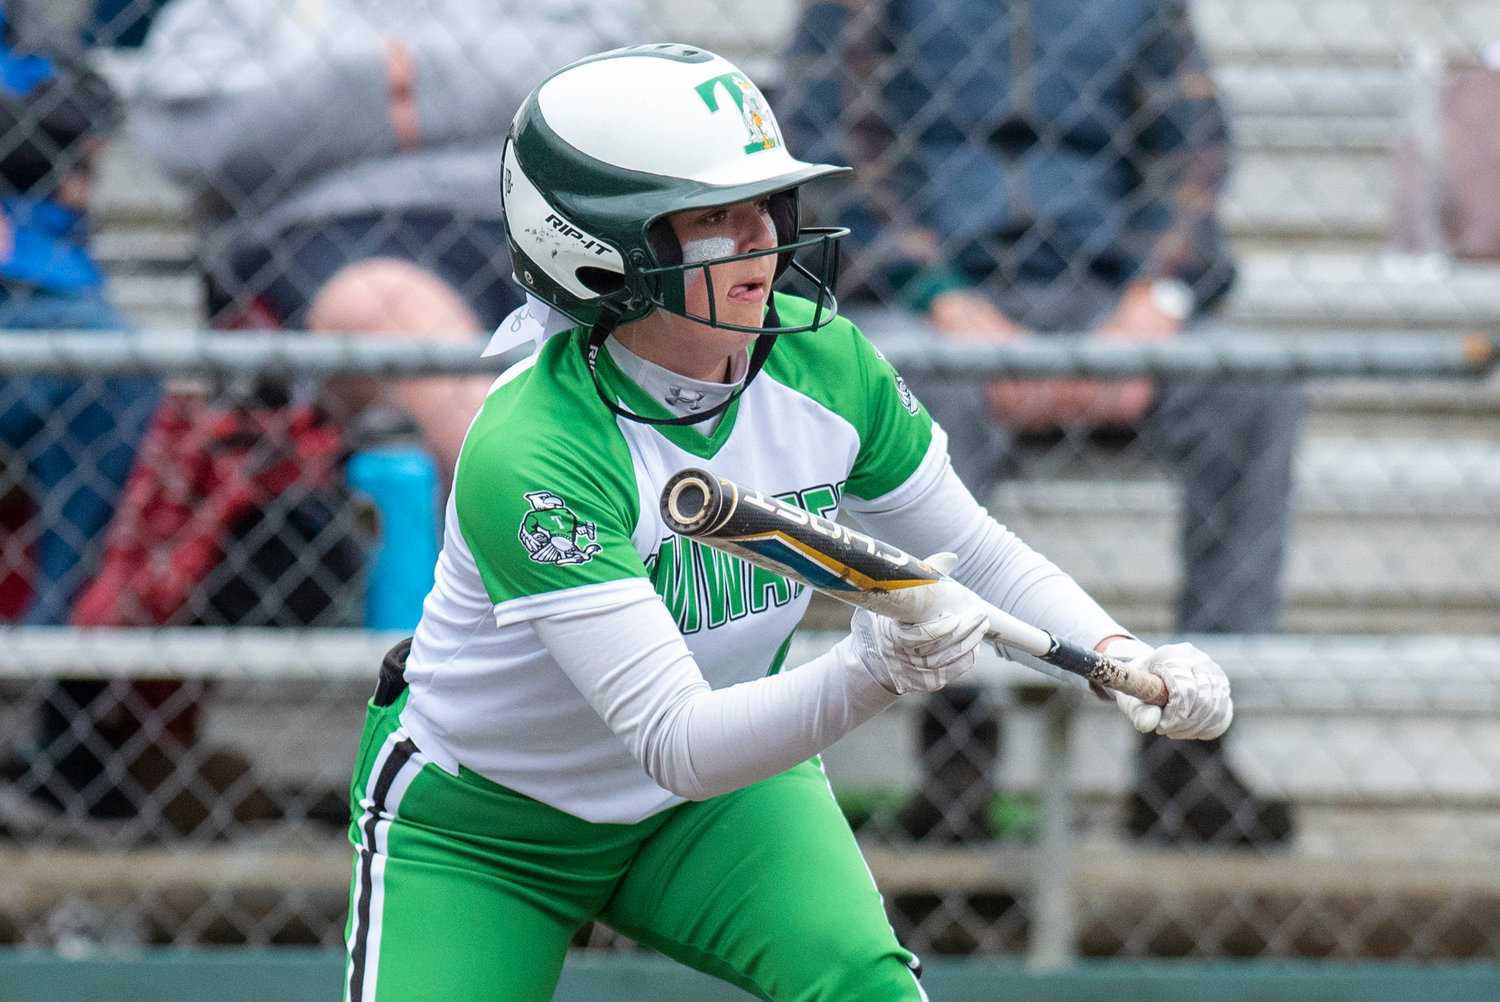 A Tumwater batter prepares to bunt against W.F. West during a home game on May 2.